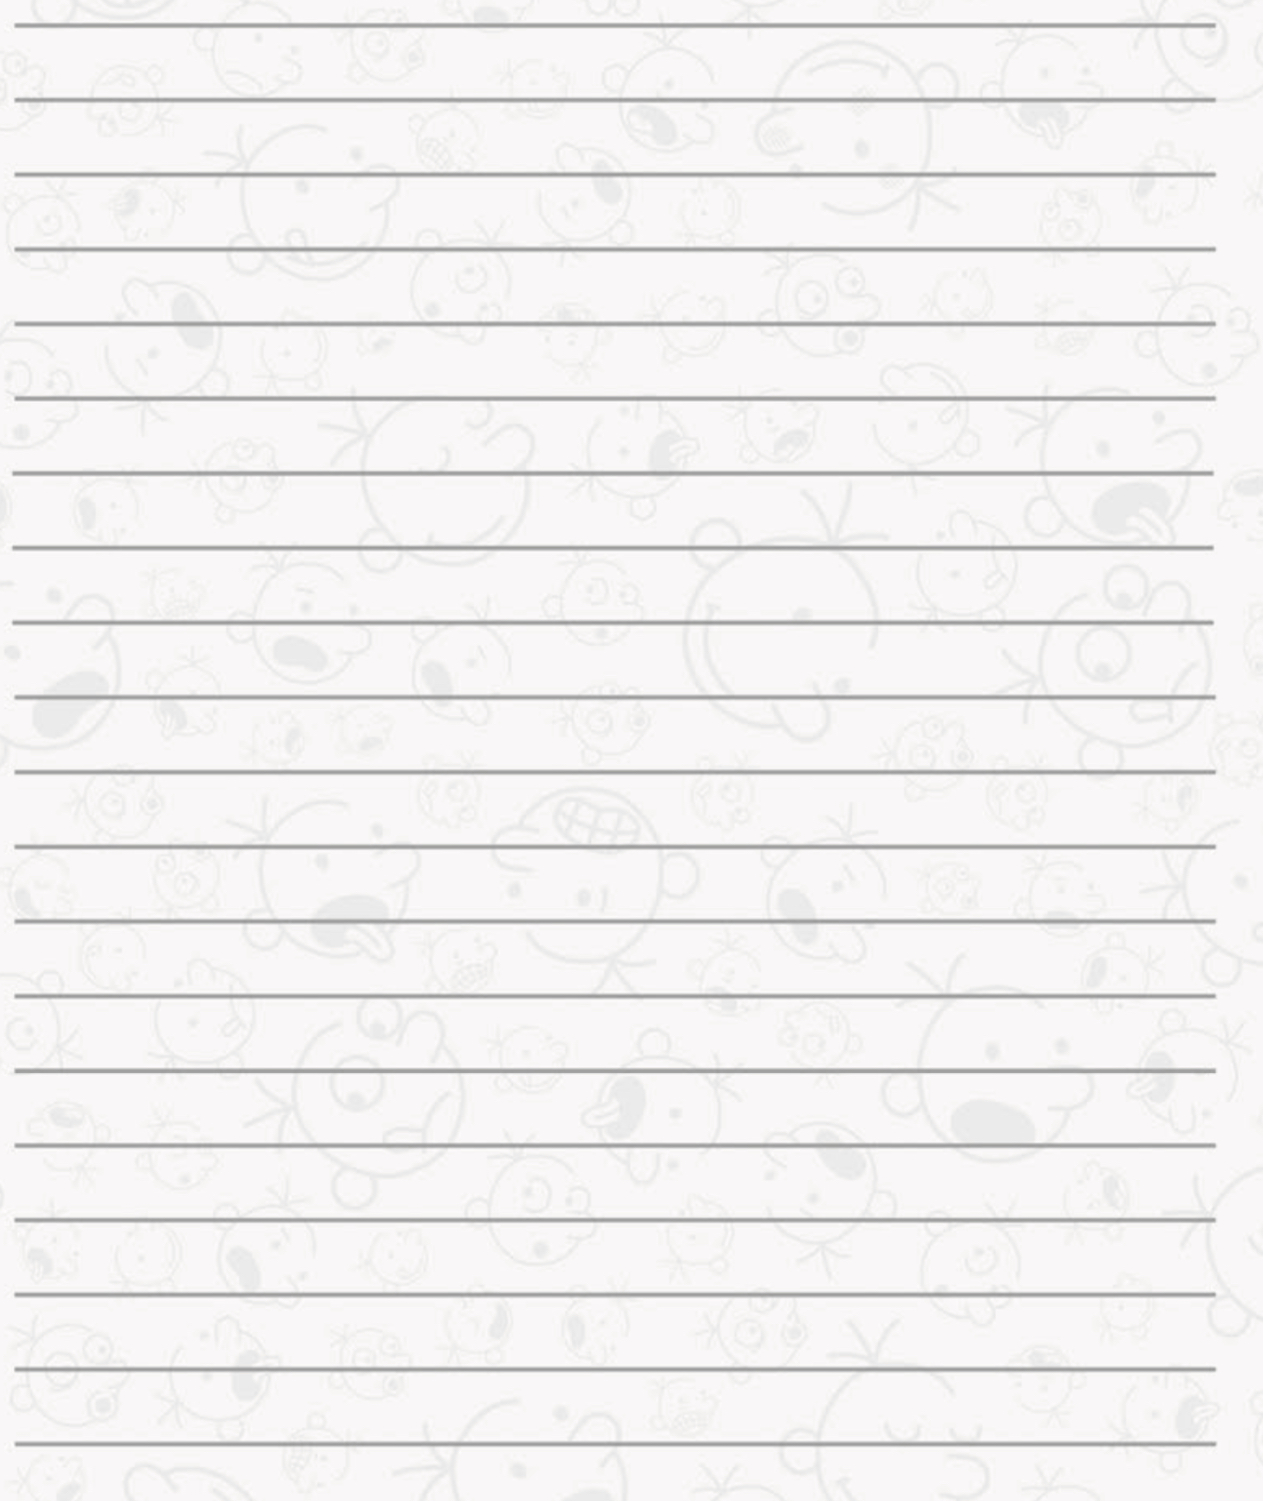 Wimpy kid fanfic page Blank Meme Template